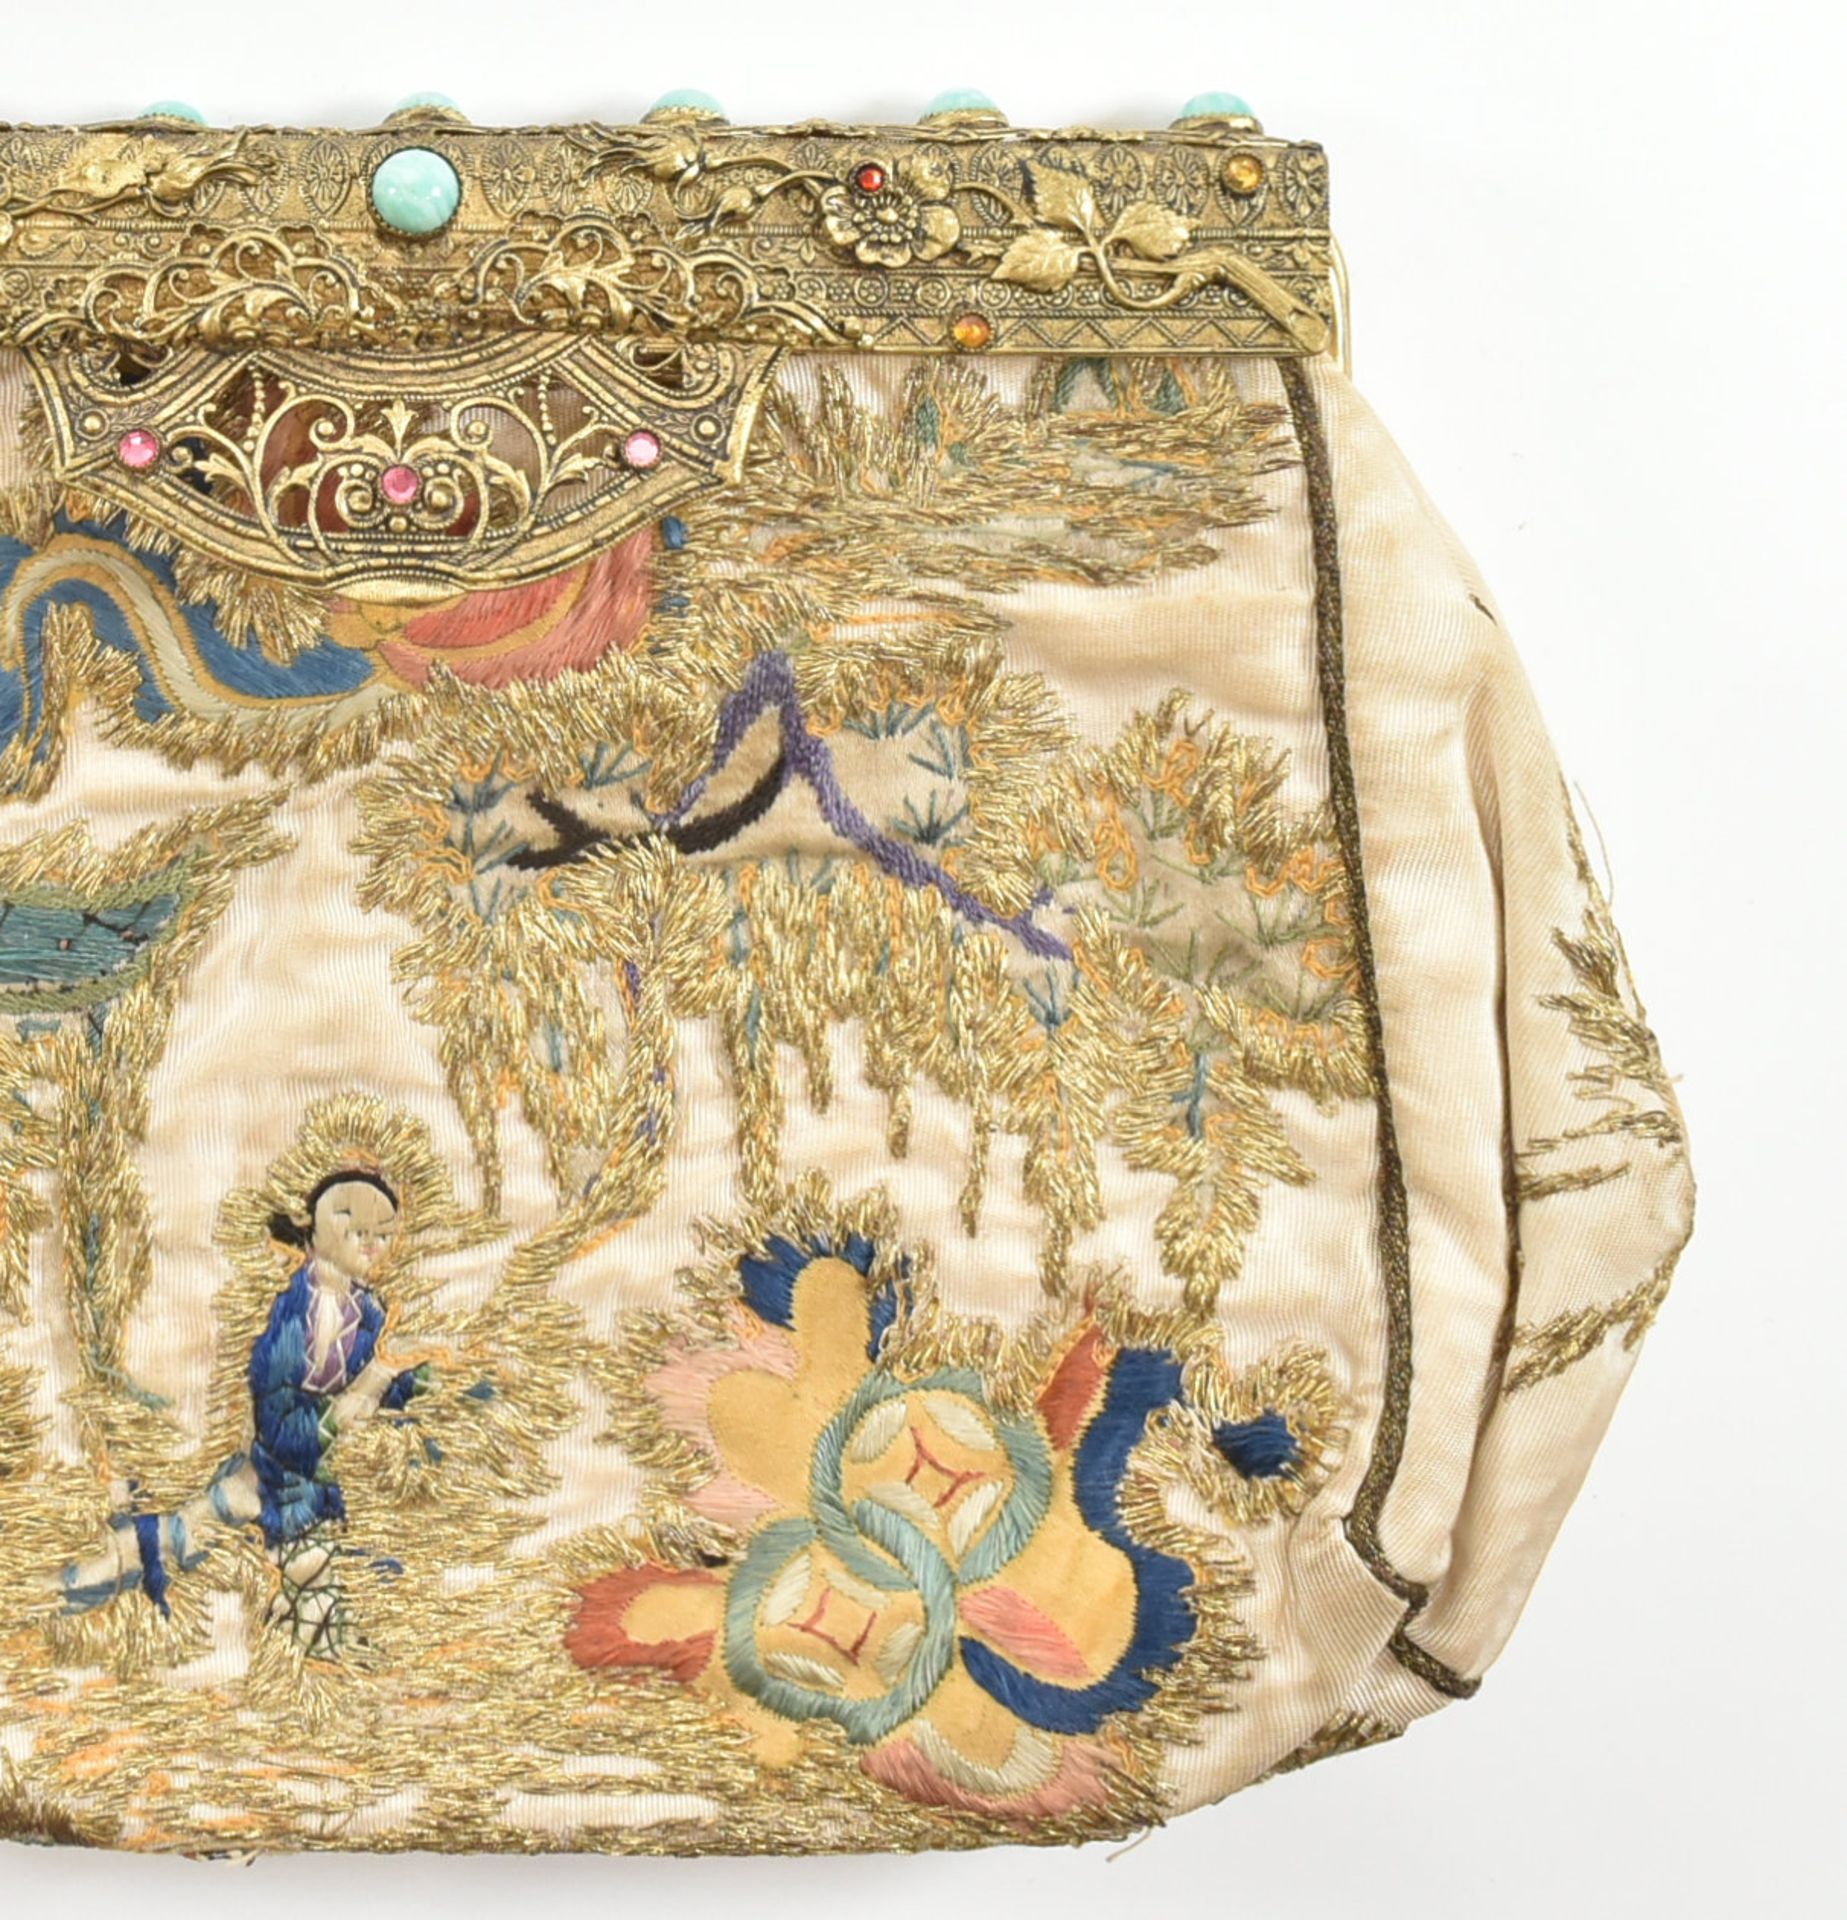 VINTAGE CZECH & CHINOISERIE EMBROIDERED HAND BAG - Image 10 of 10